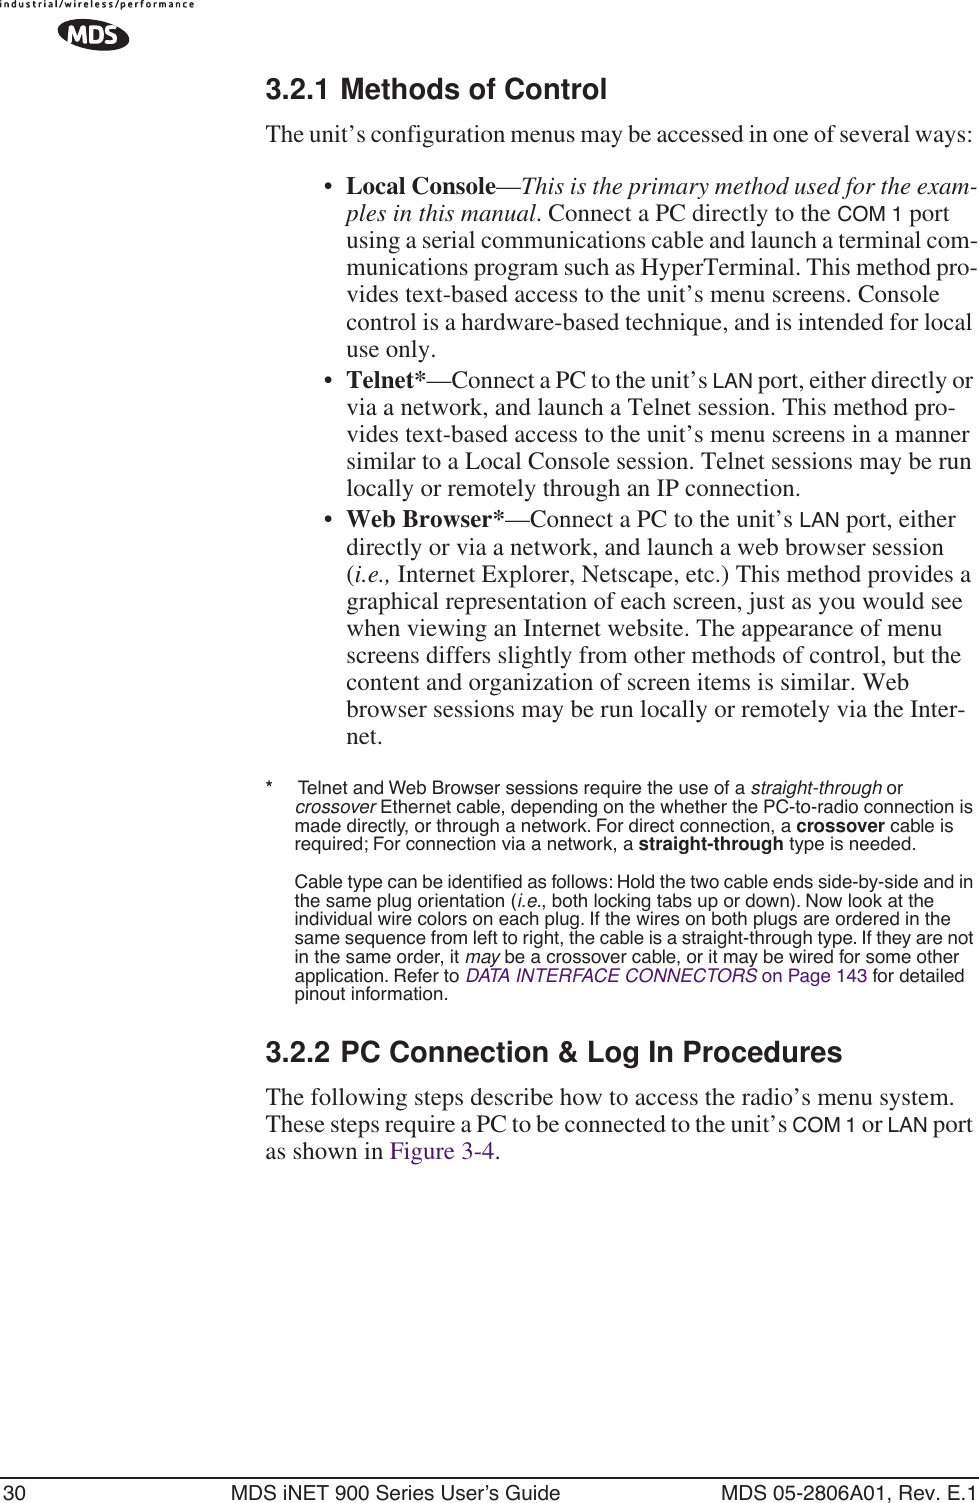 30 MDS iNET 900 Series User’s Guide MDS 05-2806A01, Rev. E.13.2.1 Methods of ControlThe unit’s configuration menus may be accessed in one of several ways: •Local Console—This is the primary method used for the exam-ples in this manual. Connect a PC directly to the COM 1 port using a serial communications cable and launch a terminal com-munications program such as HyperTerminal. This method pro-vides text-based access to the unit’s menu screens. Console control is a hardware-based technique, and is intended for local use only.•Telnet*—Connect a PC to the unit’s LAN port, either directly or via a network, and launch a Telnet session. This method pro-vides text-based access to the unit’s menu screens in a manner similar to a Local Console session. Telnet sessions may be run locally or remotely through an IP connection. •Web Browser*—Connect a PC to the unit’s LAN port, either directly or via a network, and launch a web browser session (i.e., Internet Explorer, Netscape, etc.) This method provides a graphical representation of each screen, just as you would see when viewing an Internet website. The appearance of menu screens differs slightly from other methods of control, but the content and organization of screen items is similar. Web browser sessions may be run locally or remotely via the Inter-net.*     Telnet and Web Browser sessions require the use of a straight-through or crossover Ethernet cable, depending on the whether the PC-to-radio connection is made directly, or through a network. For direct connection, a crossover cable is required; For connection via a network, a straight-through type is needed.Cable type can be identiﬁed as follows: Hold the two cable ends side-by-side and in the same plug orientation (i.e., both locking tabs up or down). Now look at the individual wire colors on each plug. If the wires on both plugs are ordered in the same sequence from left to right, the cable is a straight-through type. If they are not in the same order, it may be a crossover cable, or it may be wired for some other application. Refer to DATA INTERFACE CONNECTORS on Page 143 for detailed pinout information.3.2.2 PC Connection &amp; Log In ProceduresThe following steps describe how to access the radio’s menu system. These steps require a PC to be connected to the unit’s COM 1 or LAN port as shown in Figure 3-4. 